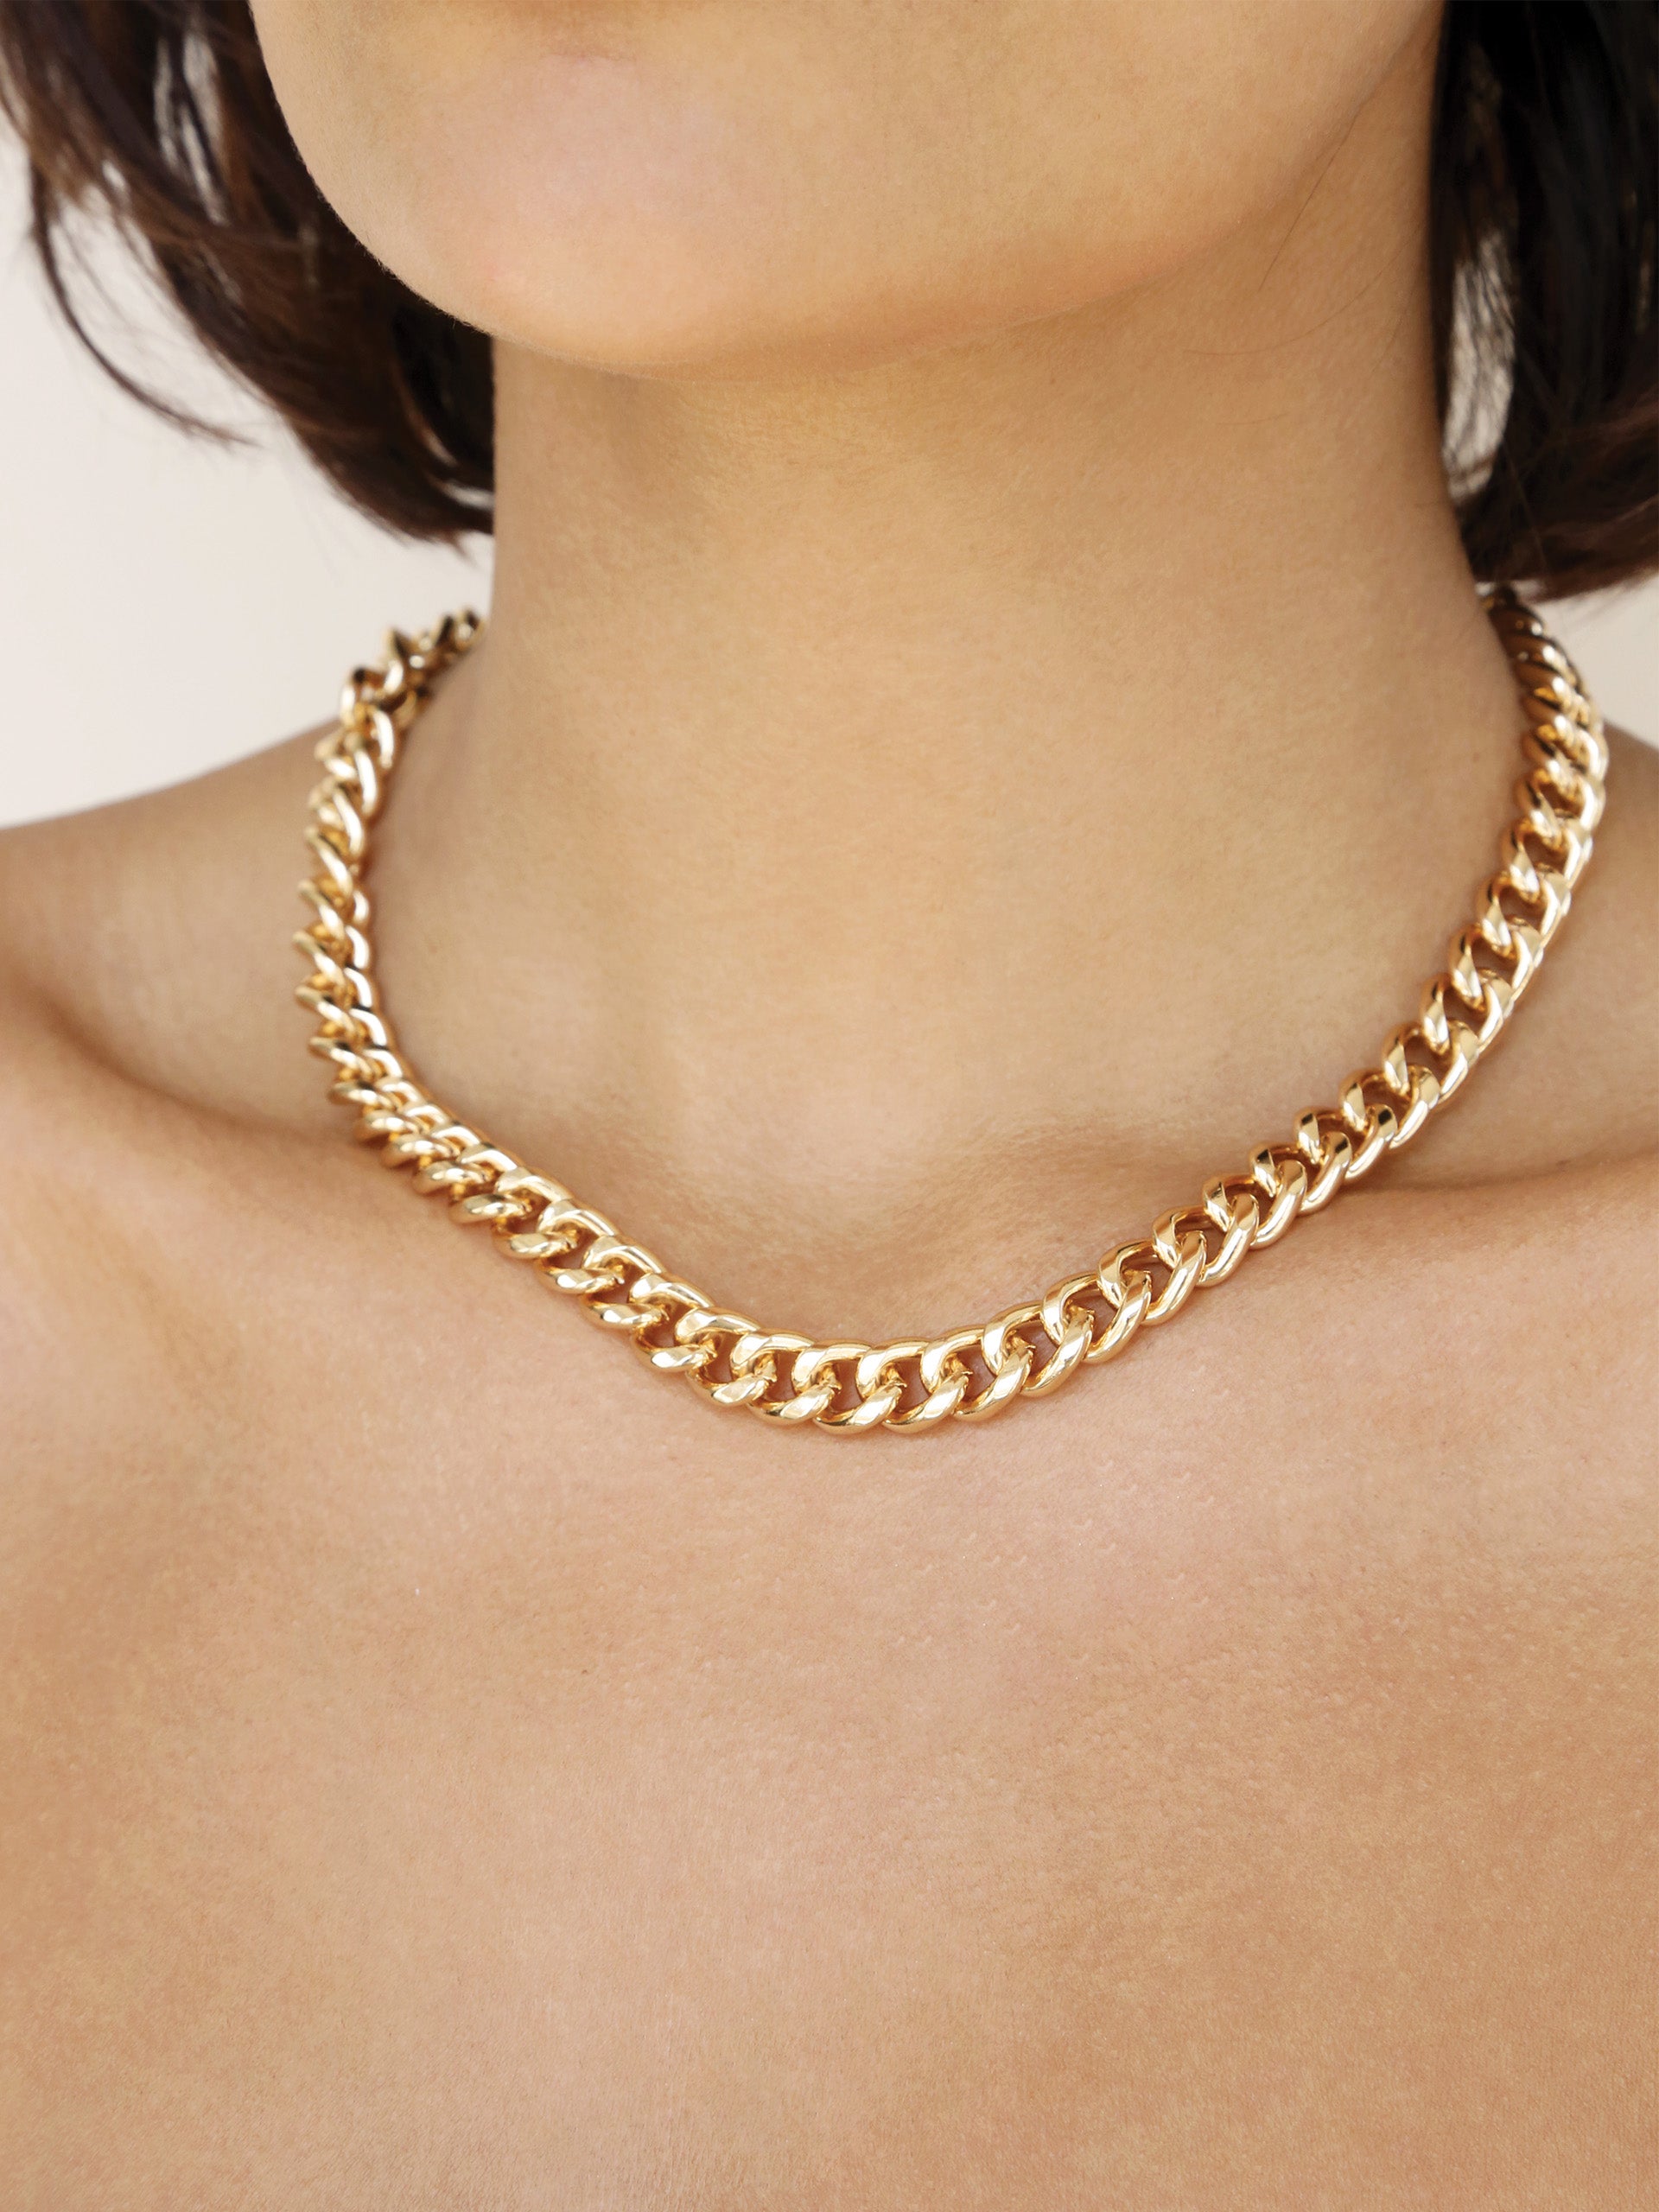 Always Linked Thick Chain Necklace on model 